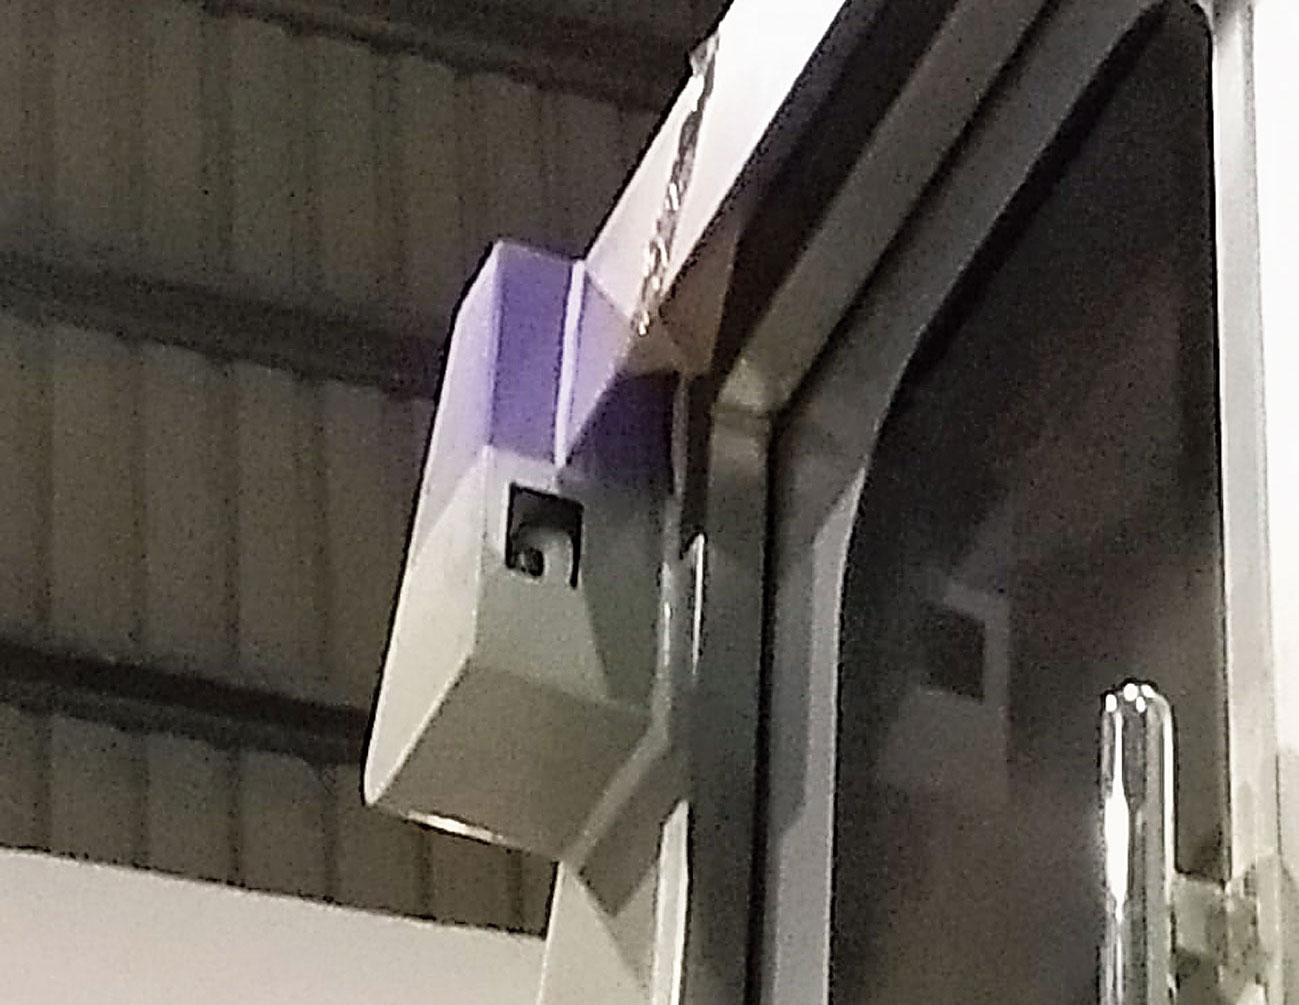 A CCTV camera attached to the driver’s cabin of an East-West Metro